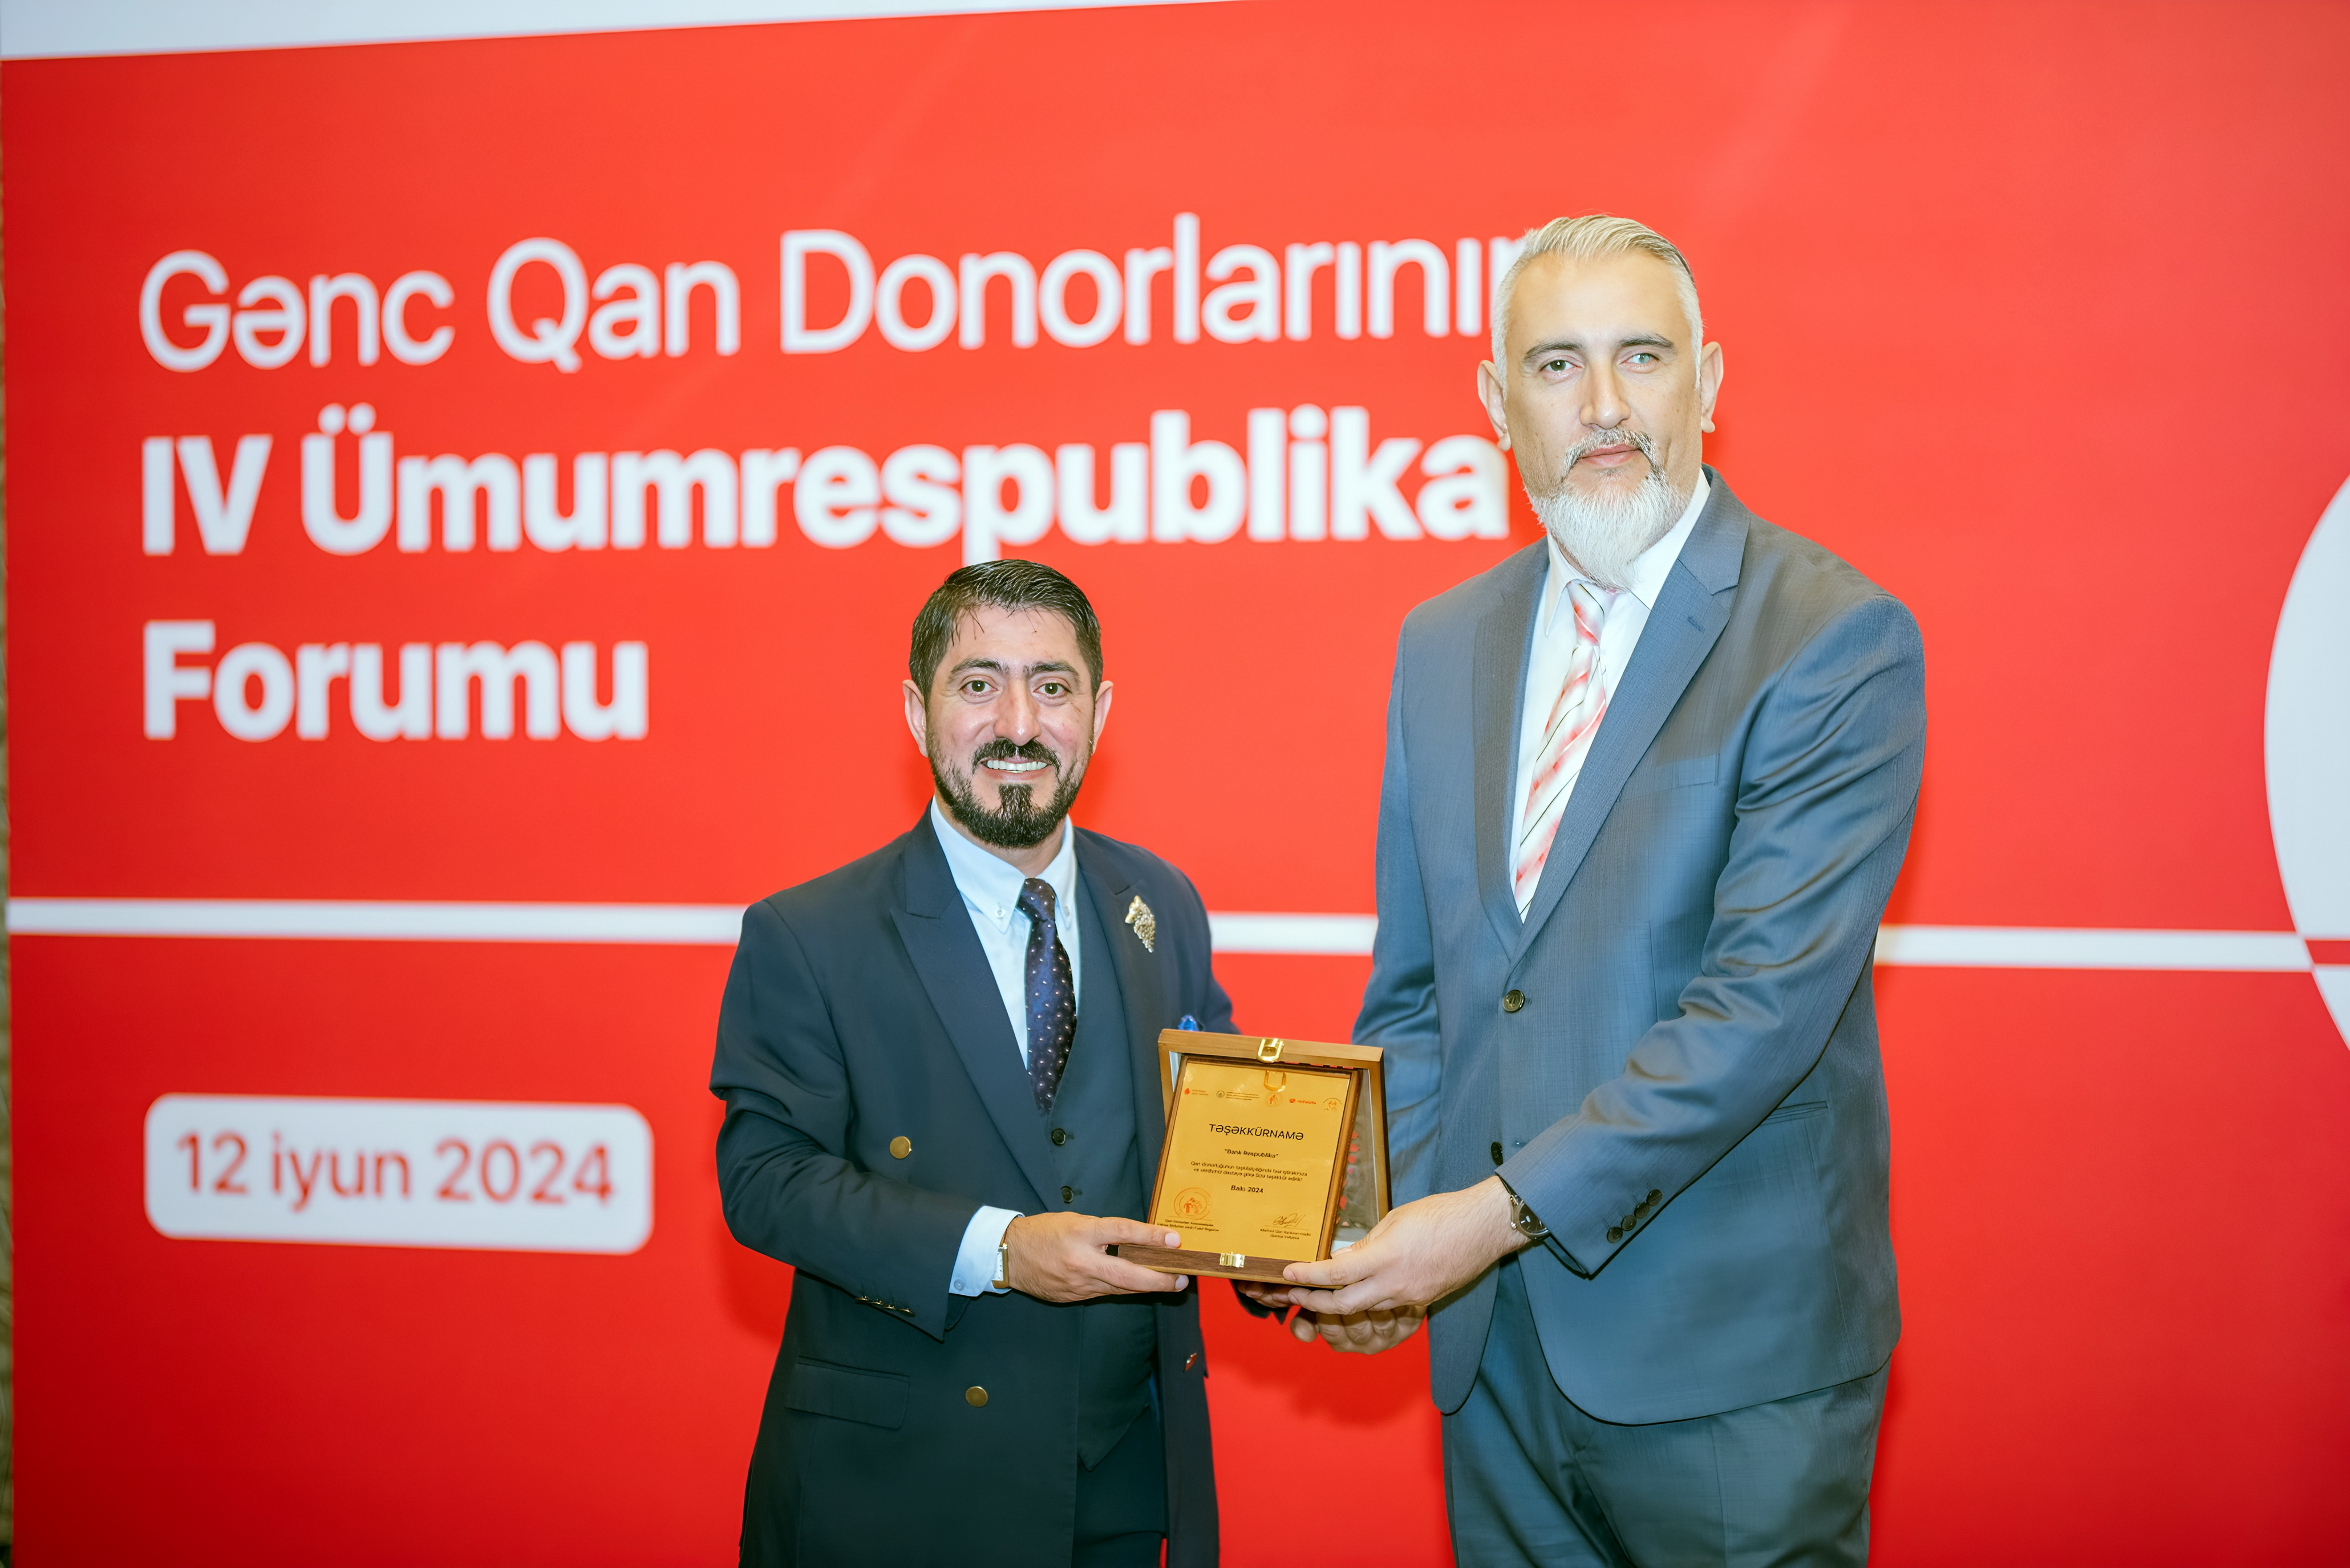 Bank Respublika awarded for active participation in blood donation